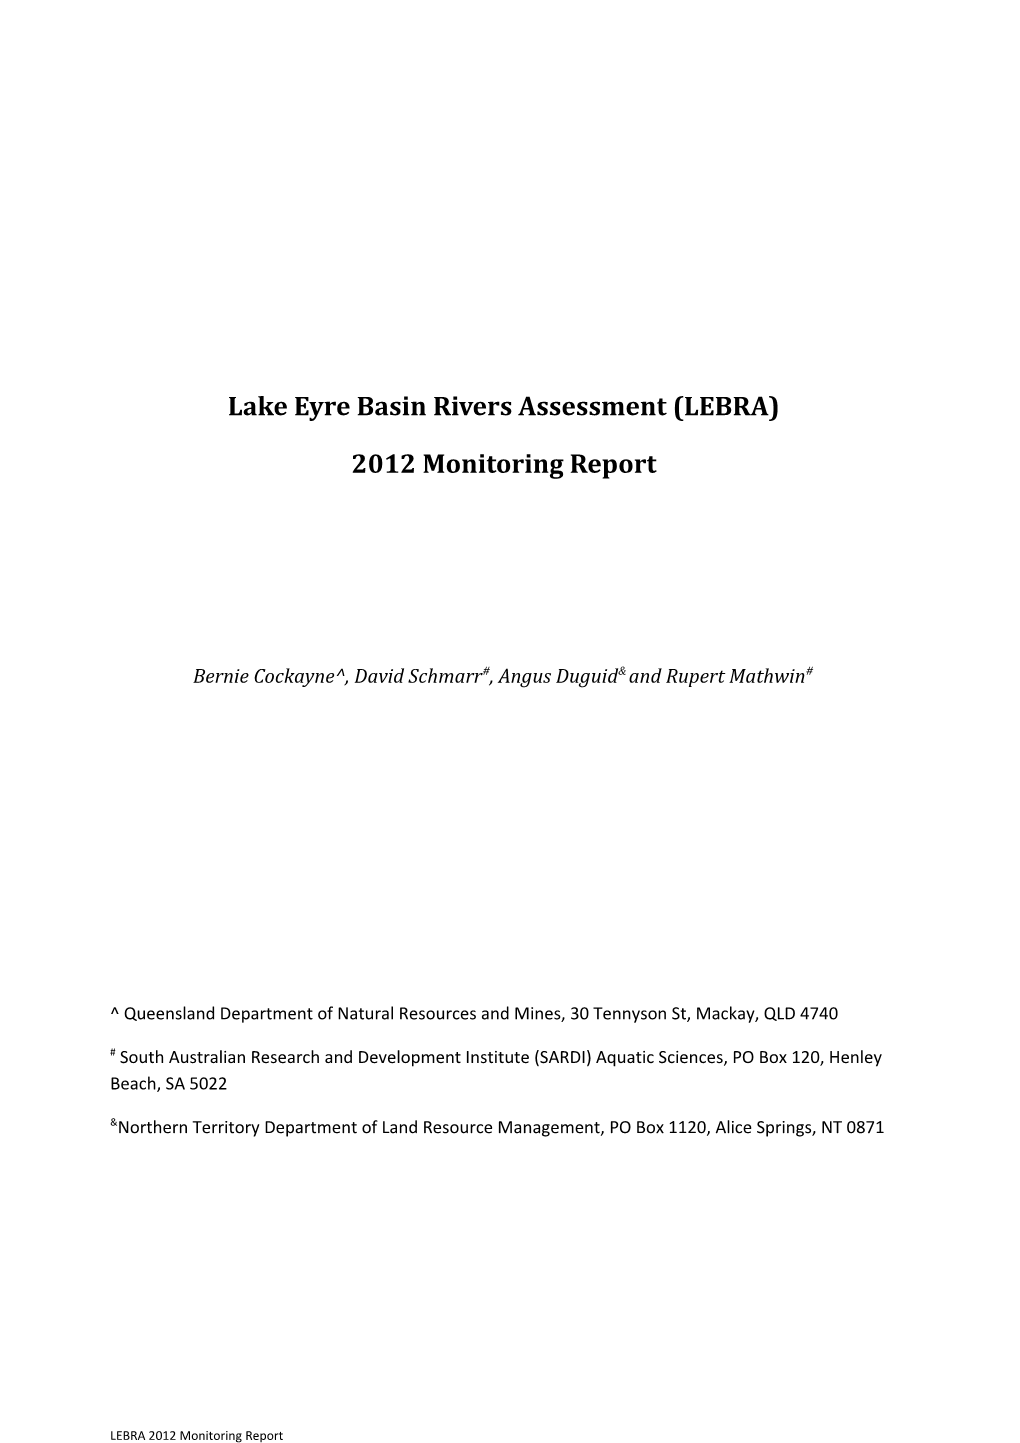 LEBRA 2011 Final Report: Suggested Draft Contents